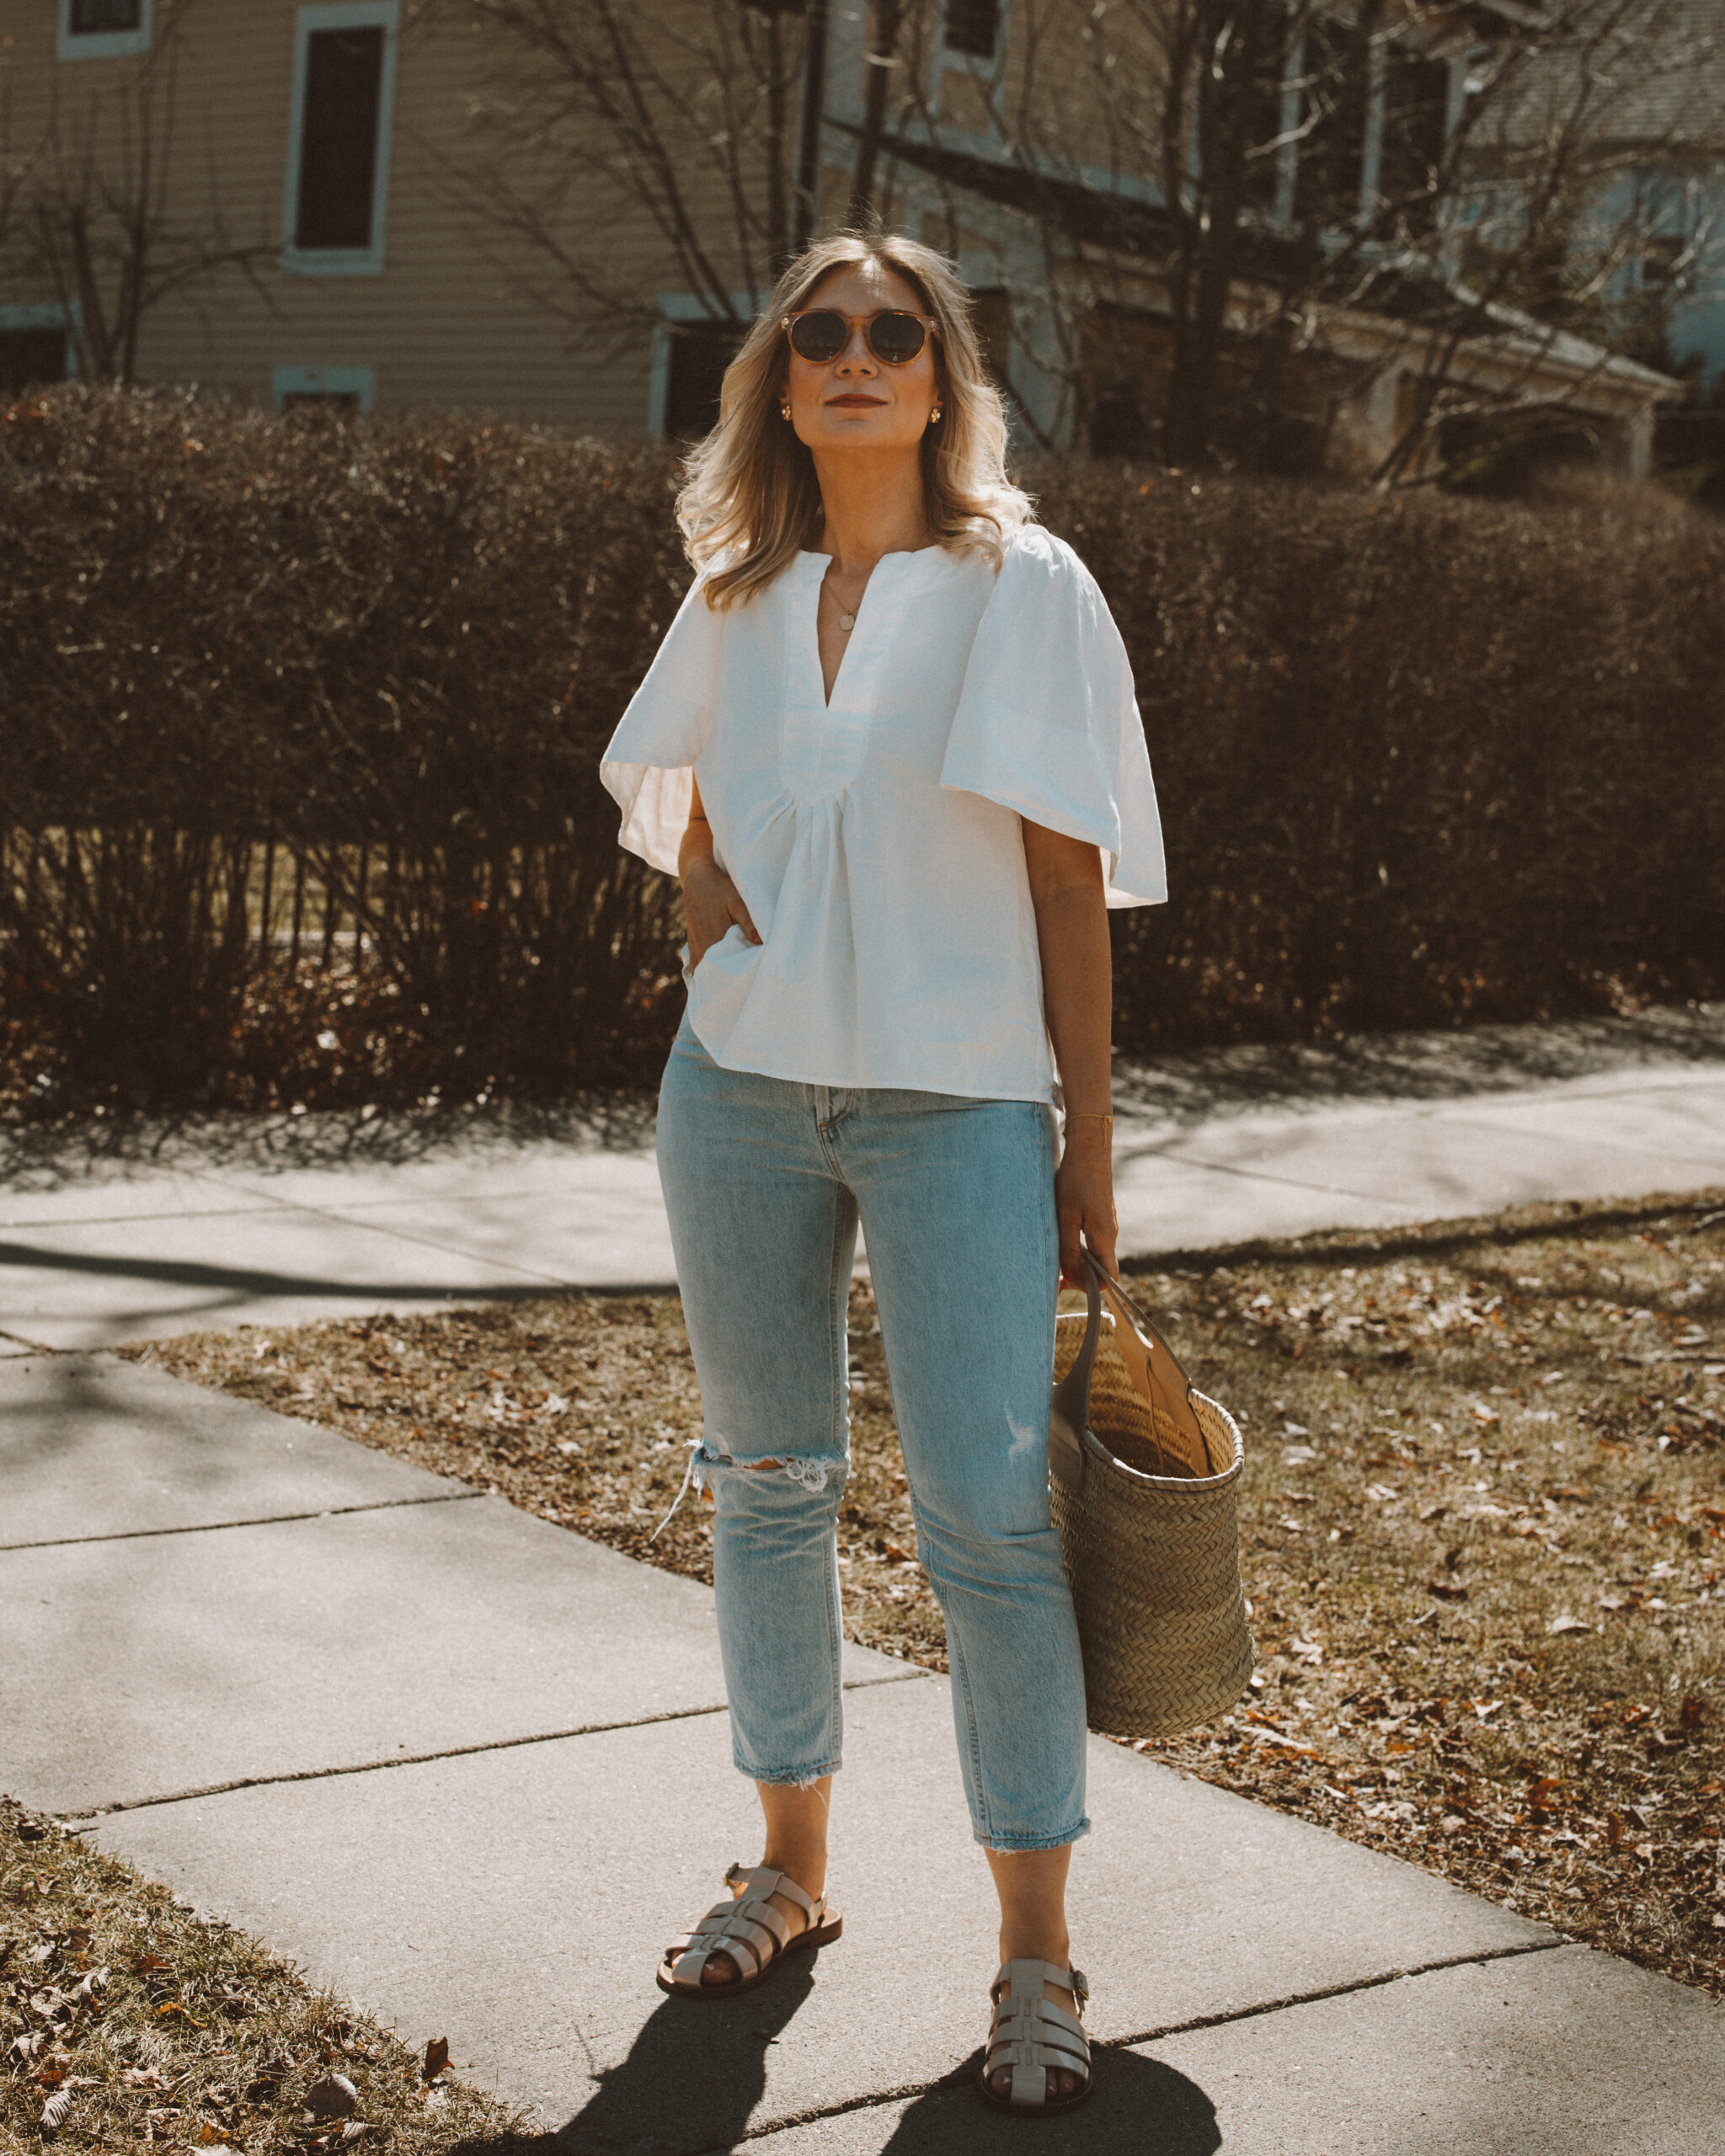 Karin Emily wears a spring top with a pair of light blue wash riley jeans from Agolde, a straw Cabas bag from Hereu, fisherman sandals from J. Crew, and clear framed sunglasses